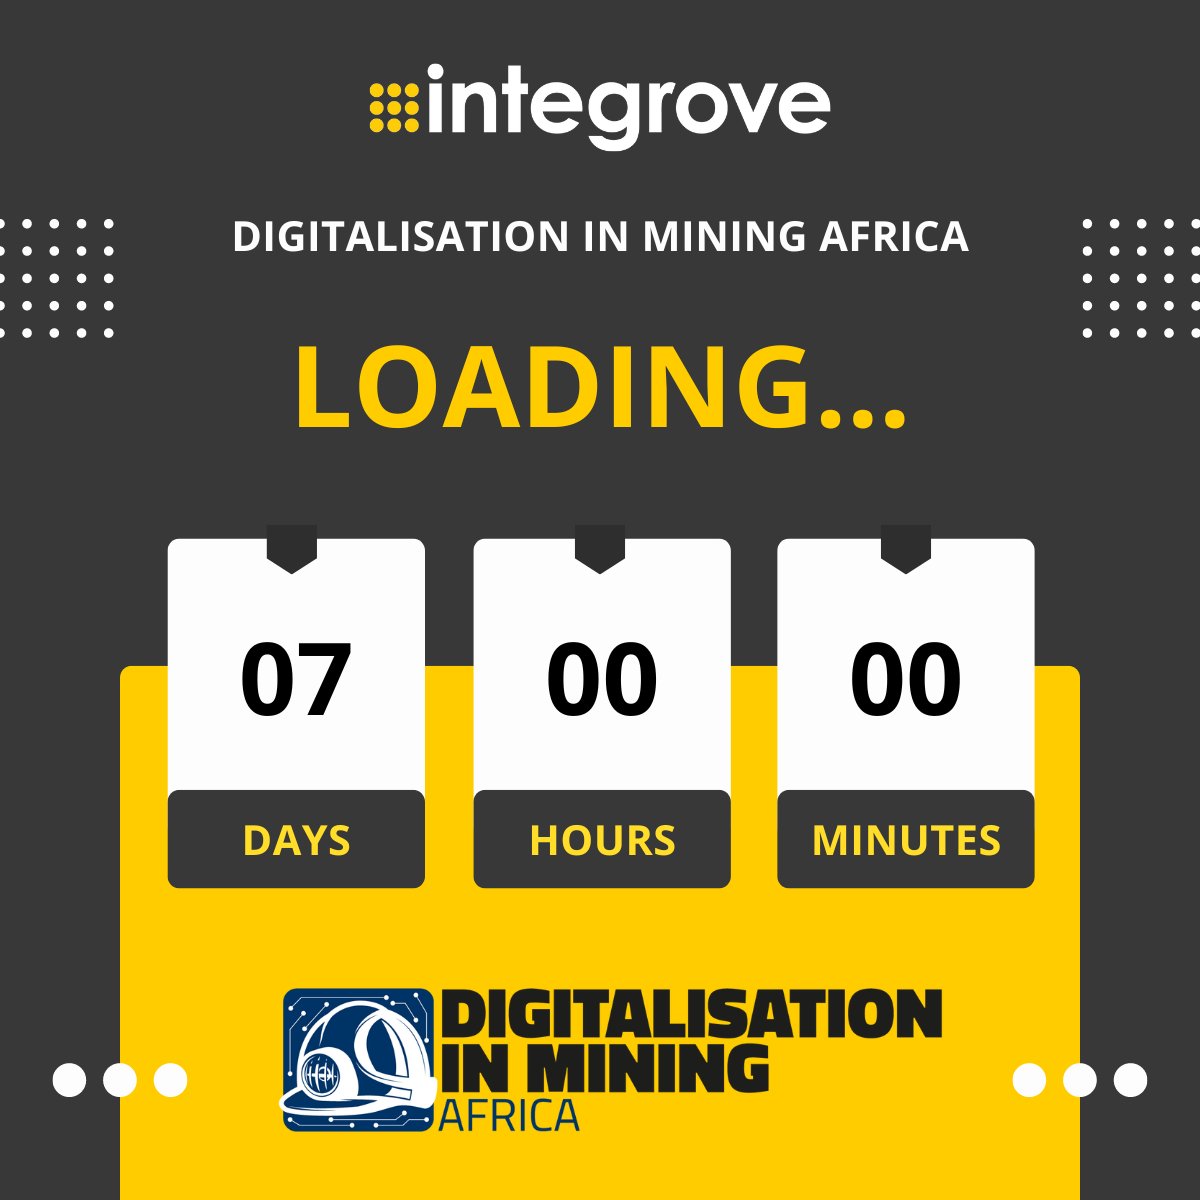 📢 One week to go until Digitalisation in Mining Africa! 

Don't miss out on our keynote showcase and round table discussion. Reserve your spot now! 

#Mining #Digitalisation #IndustryTrends